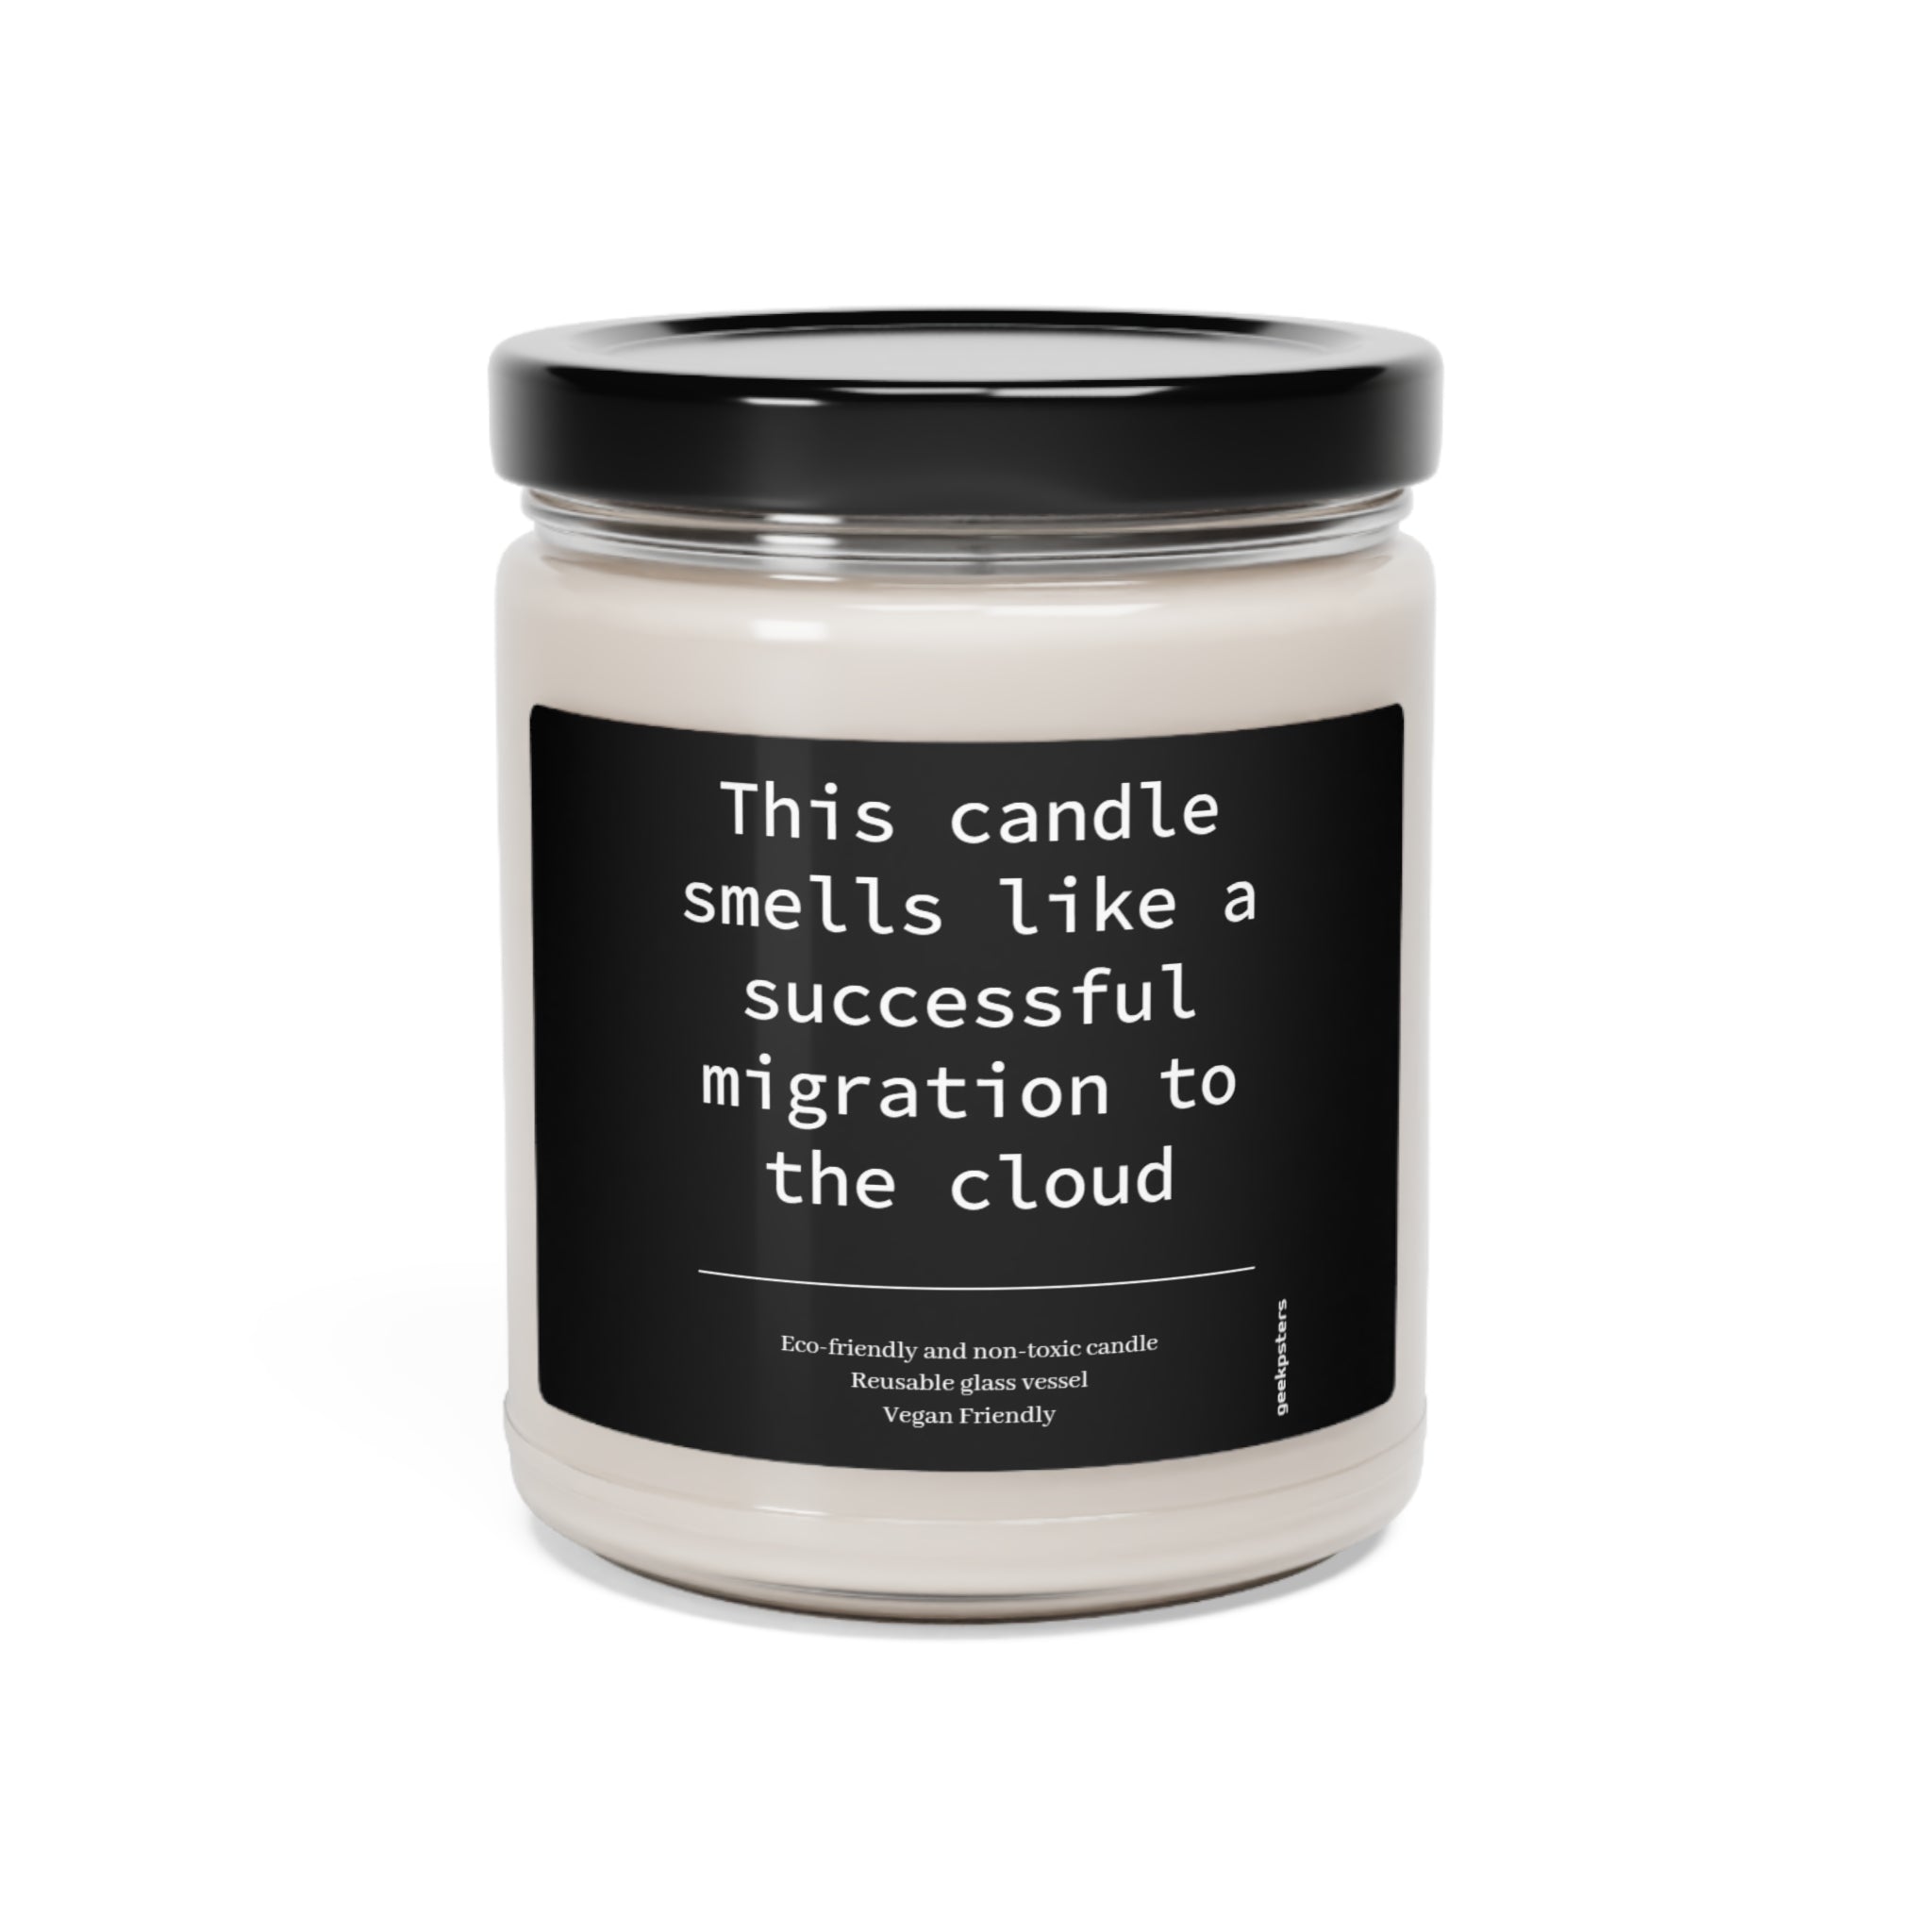 A white scented candle made from a natural soy wax blend, in a glass jar with a humorous label that reads "this candle smells like a successful migration to the cloud"

Product Name: Cloud Migration Scented Soy Candle, 9oz